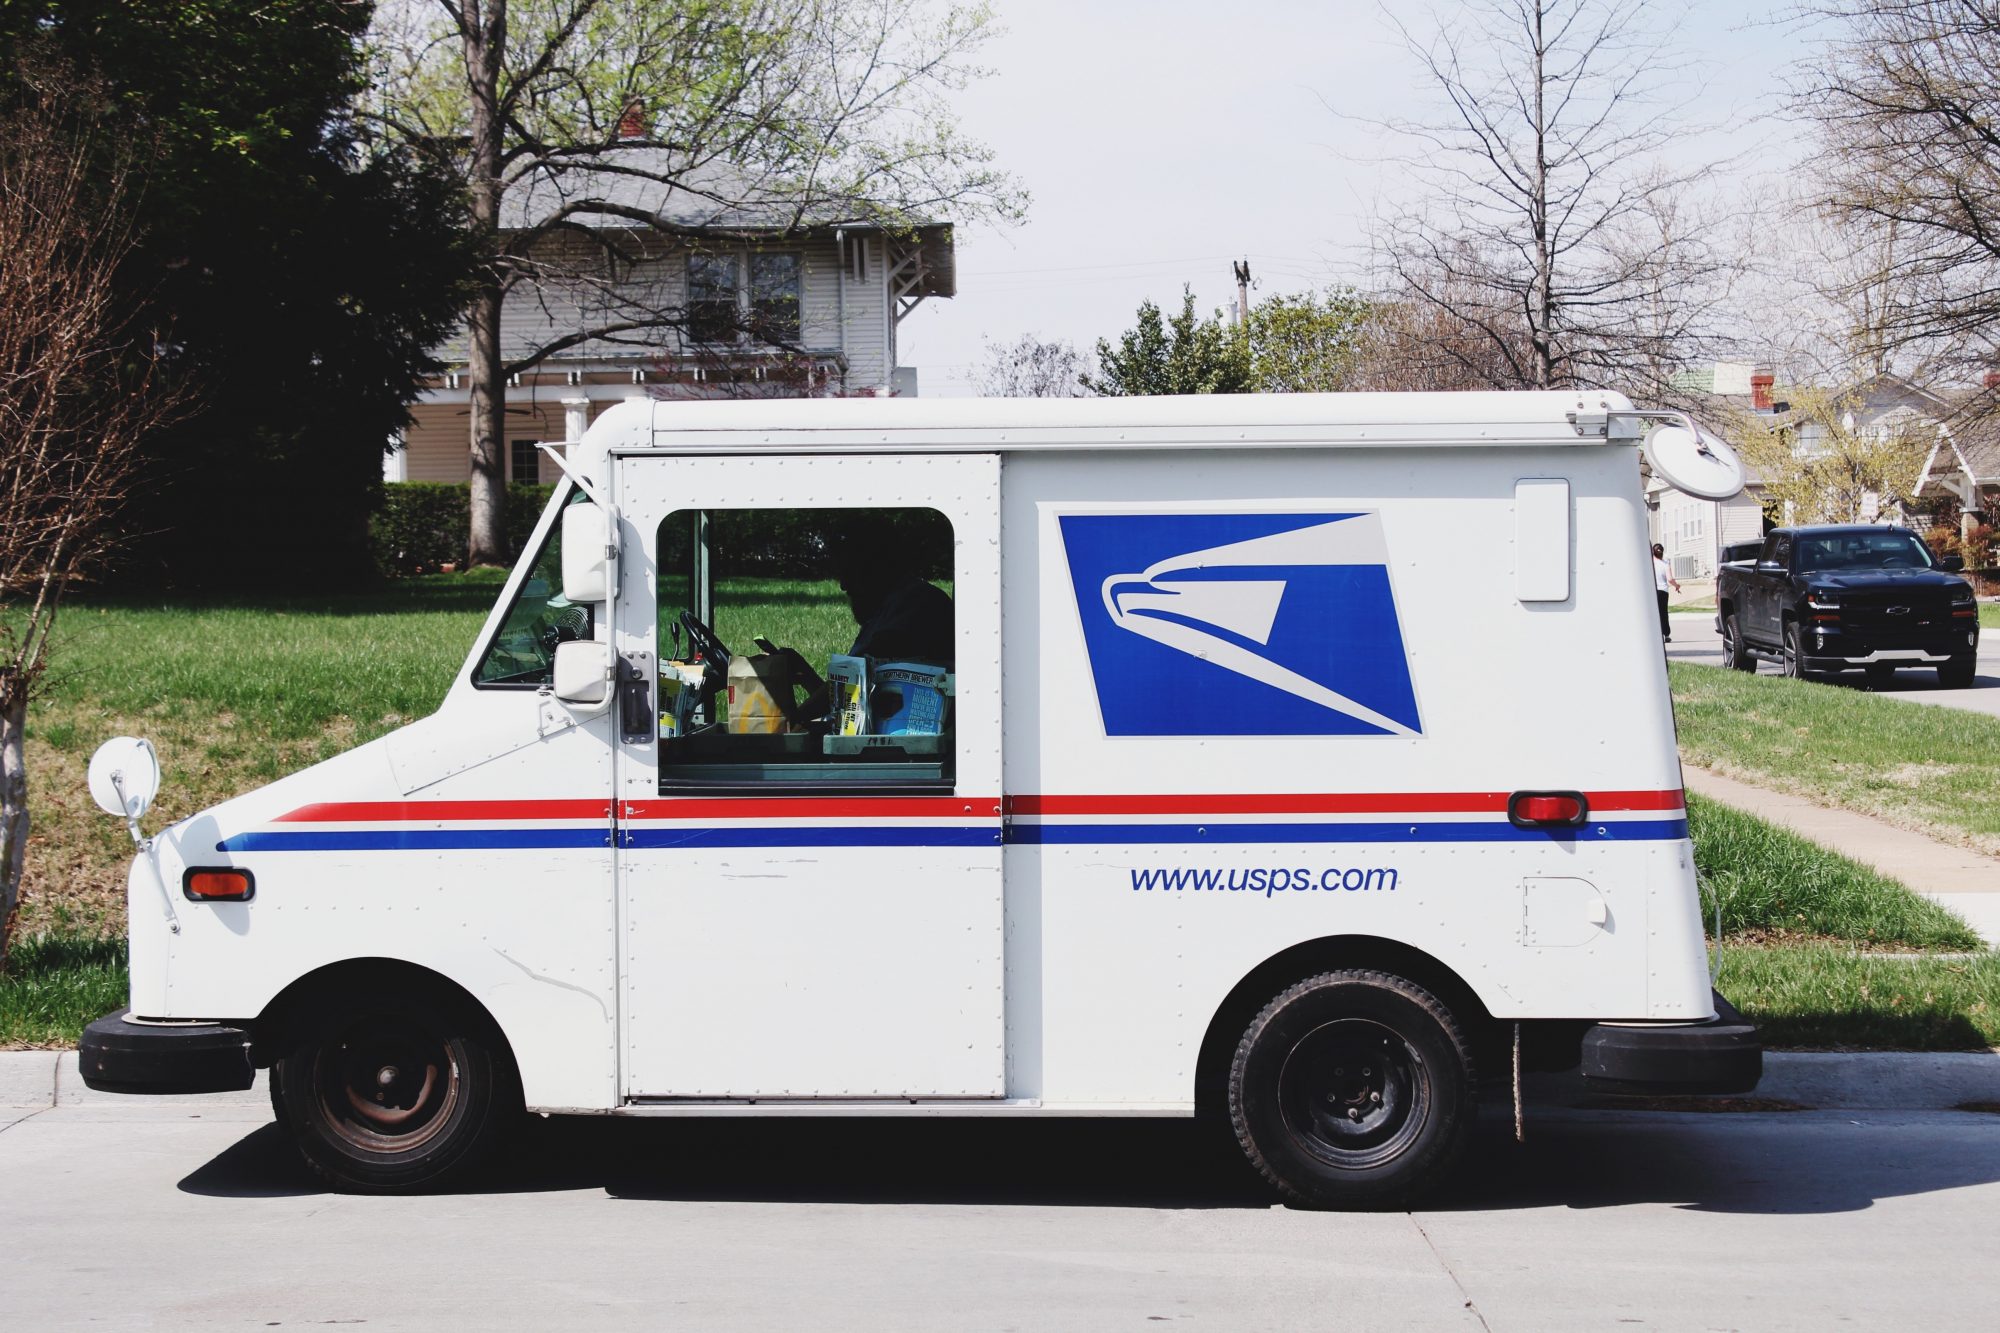 USPS teams up with self-driving truck startup TuSimple in Arizona - Chamber Business News